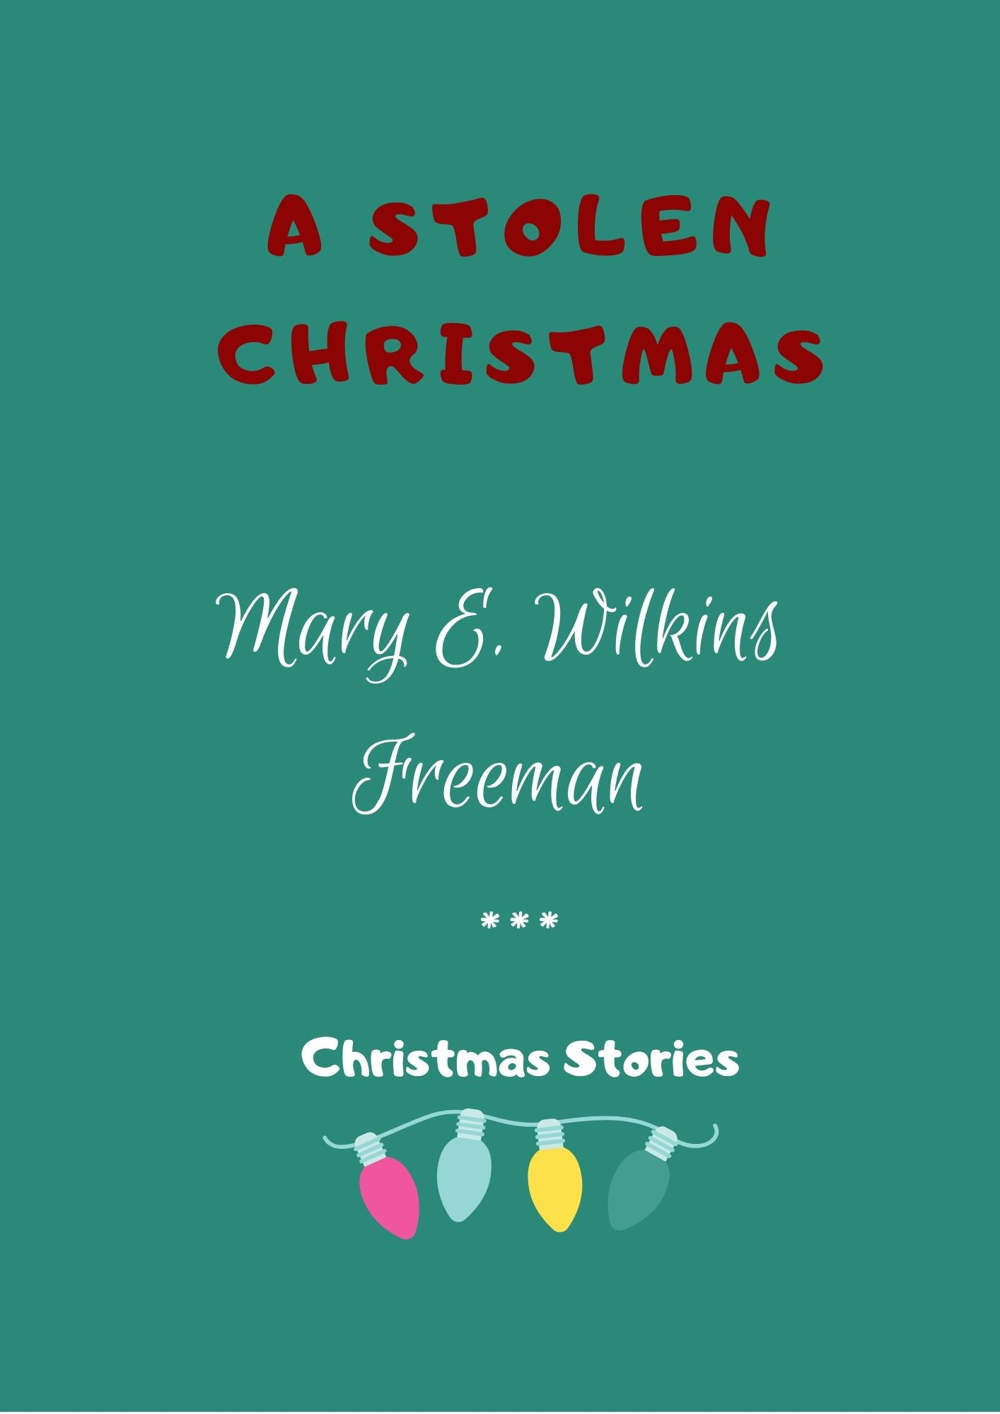 A Stolen Christmas by Mary E. Wilkins Freeman